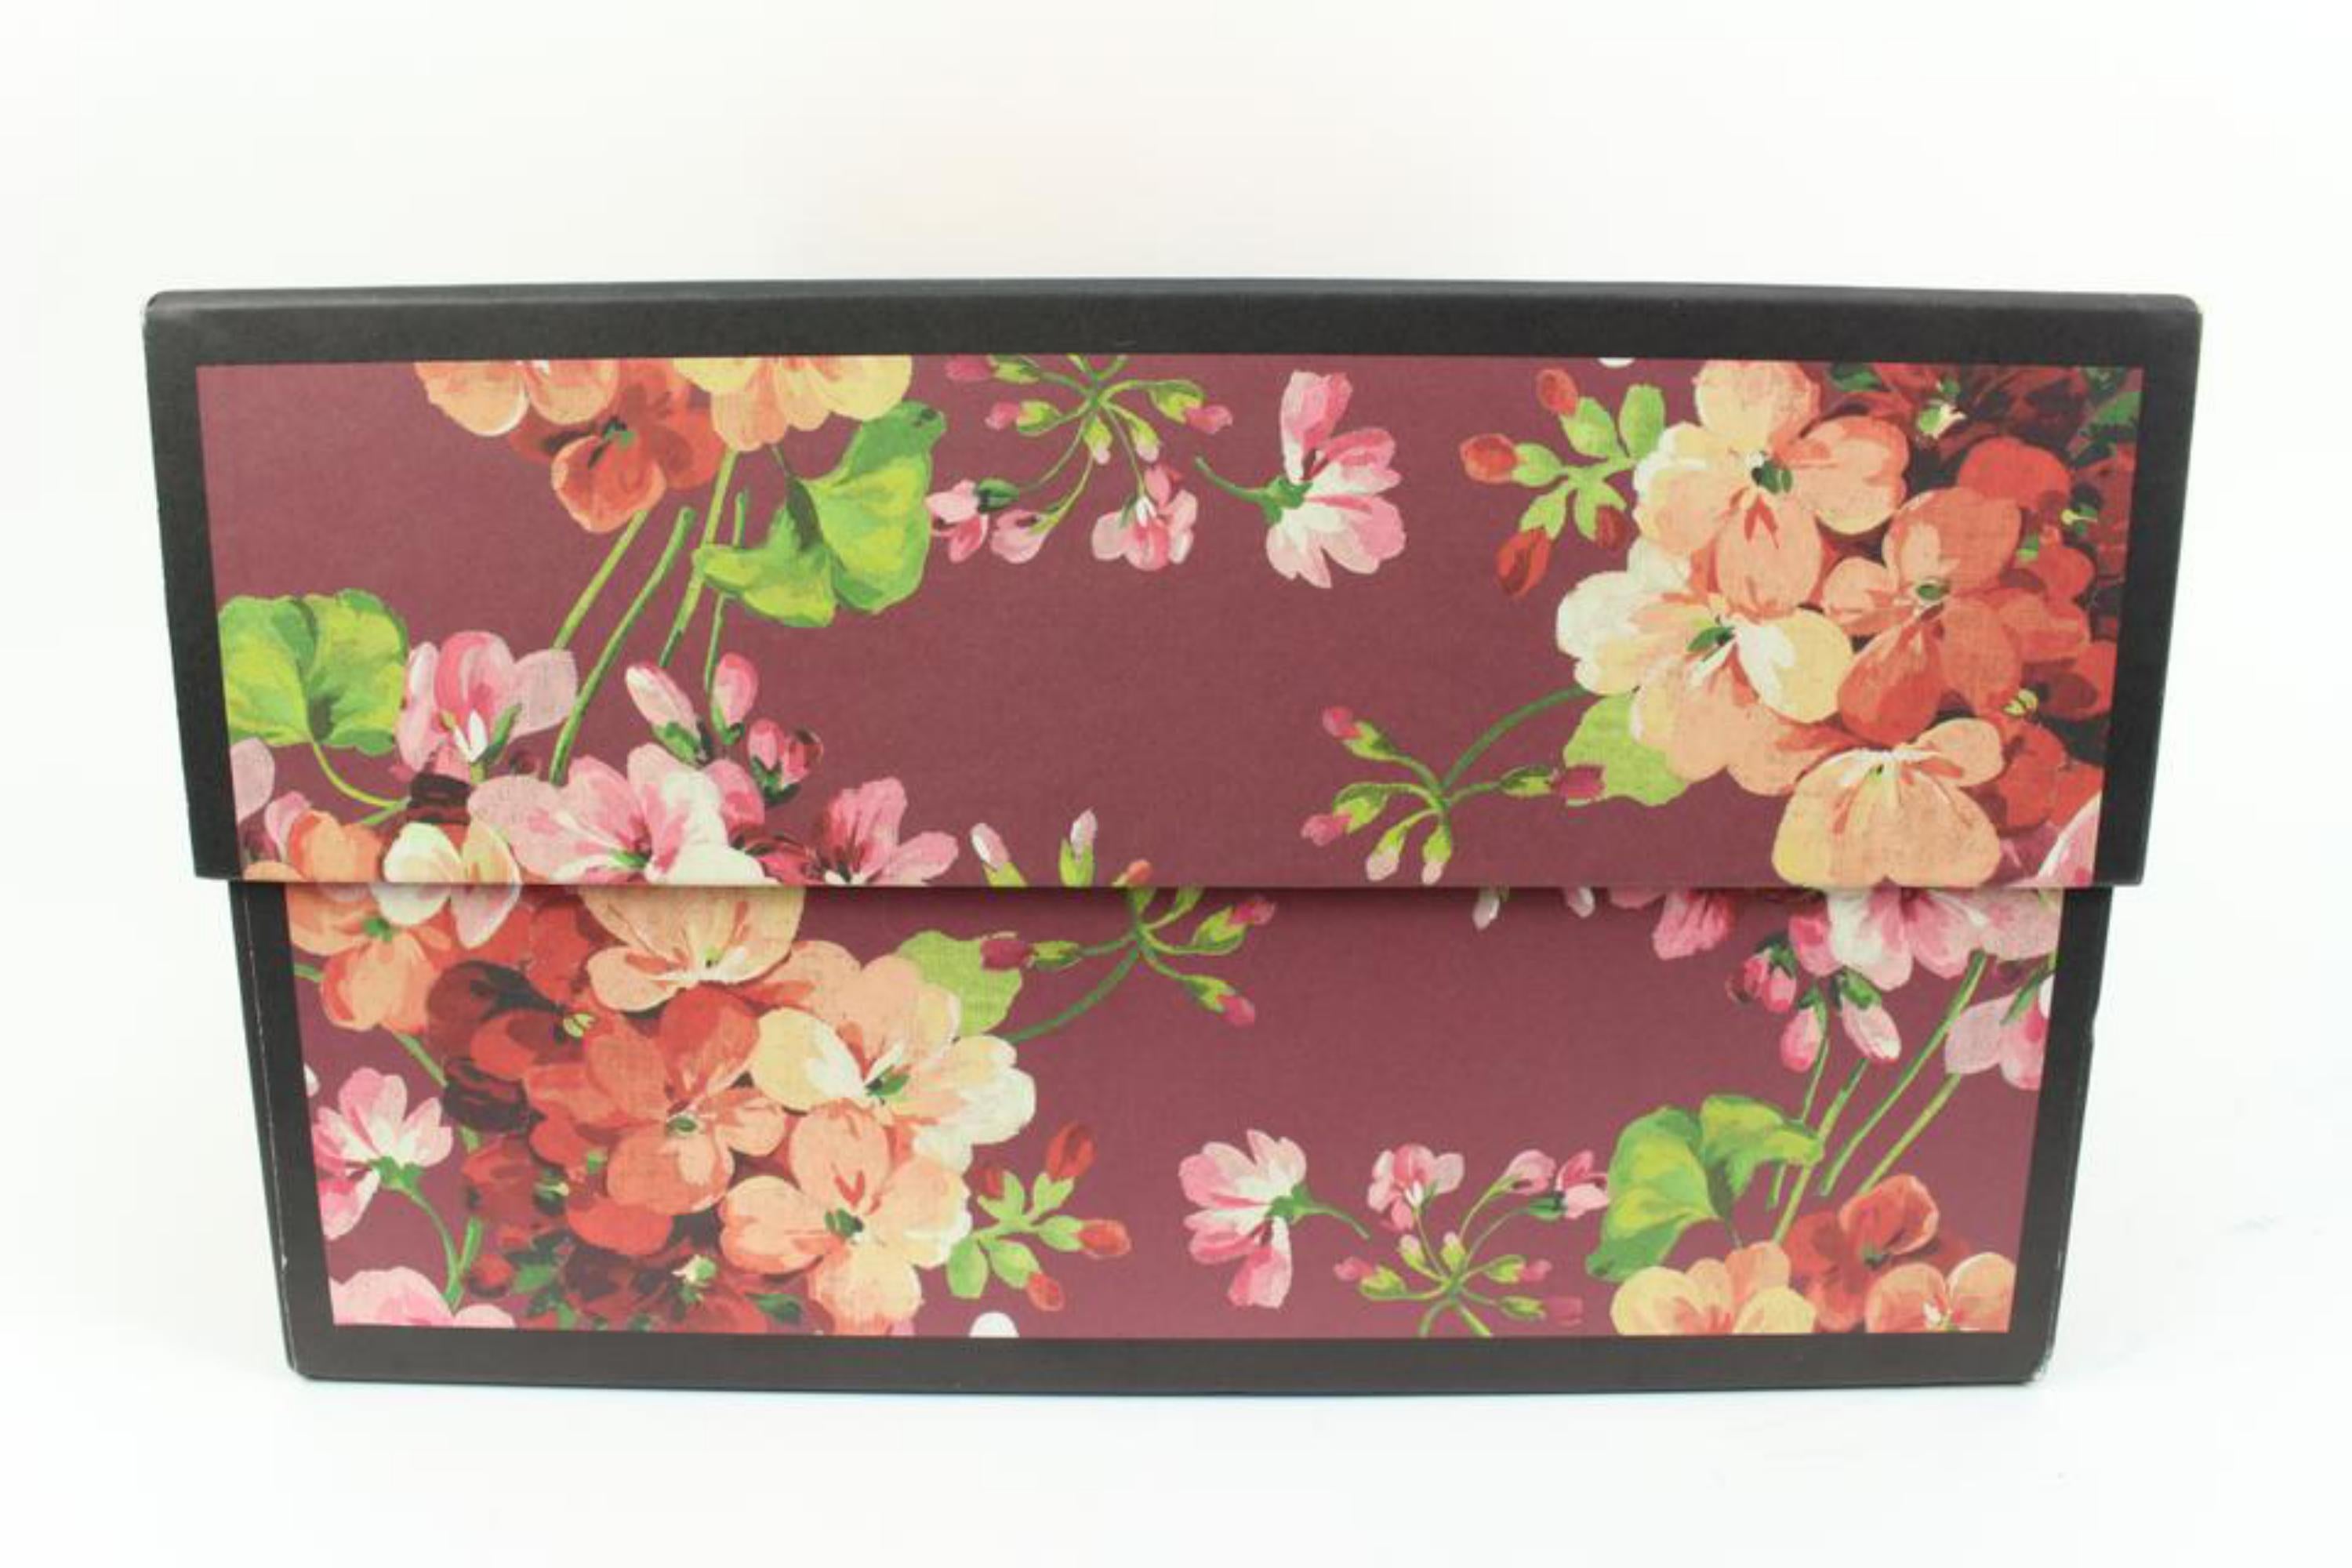 Gucci GG Blooms Box Case Floral 17g323s 2